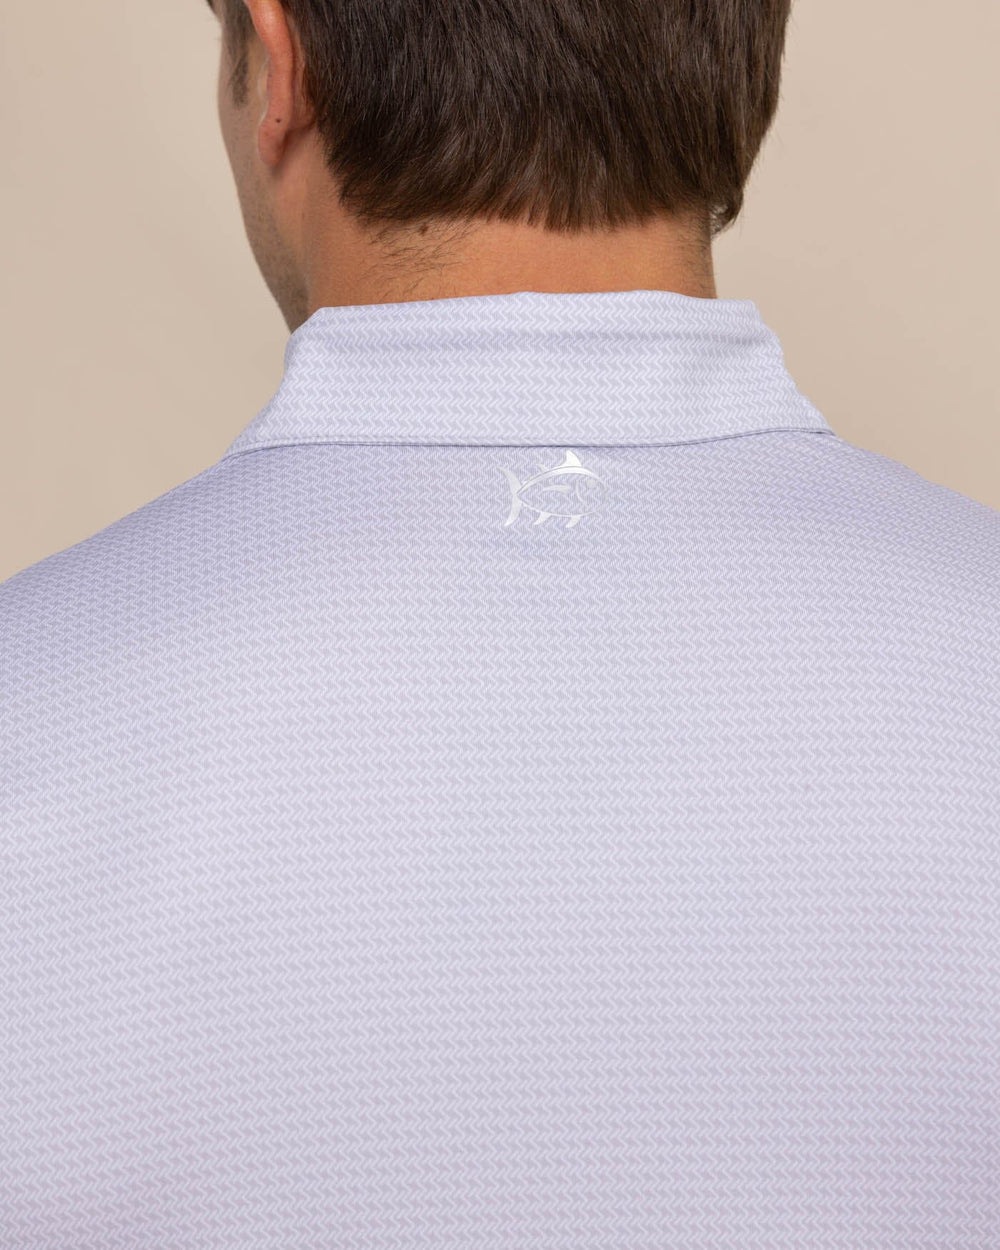 The back view of the Southern Tide Driver Getting Ziggy With It Printed Polo by Southern Tide - Platinum Grey